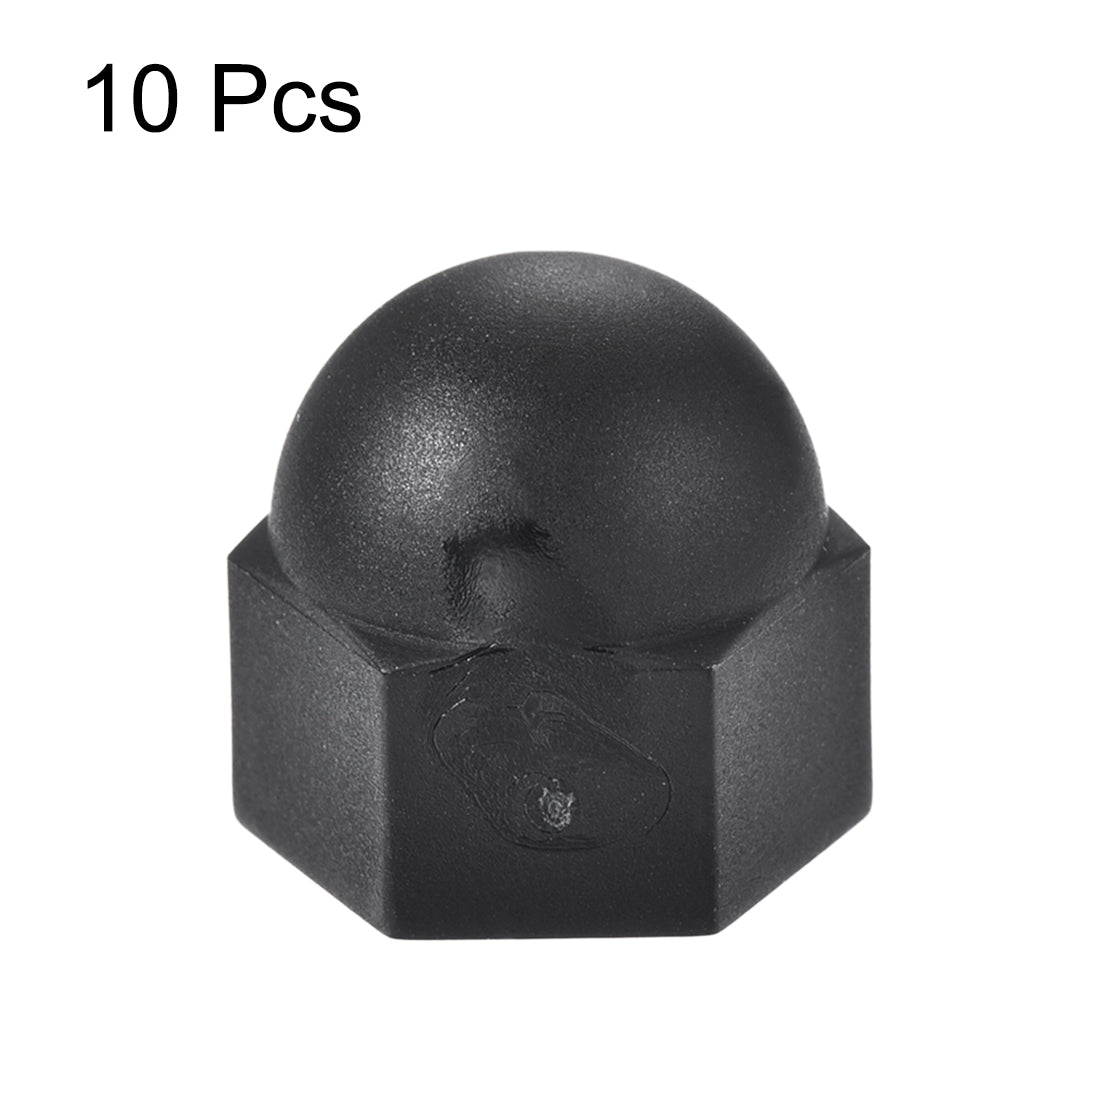 Uxcell Uxcell 10pcs M3 Plastic Dome Bolt Nut Caps Inner Threaded Protection Covers Hexagon Shaped Black